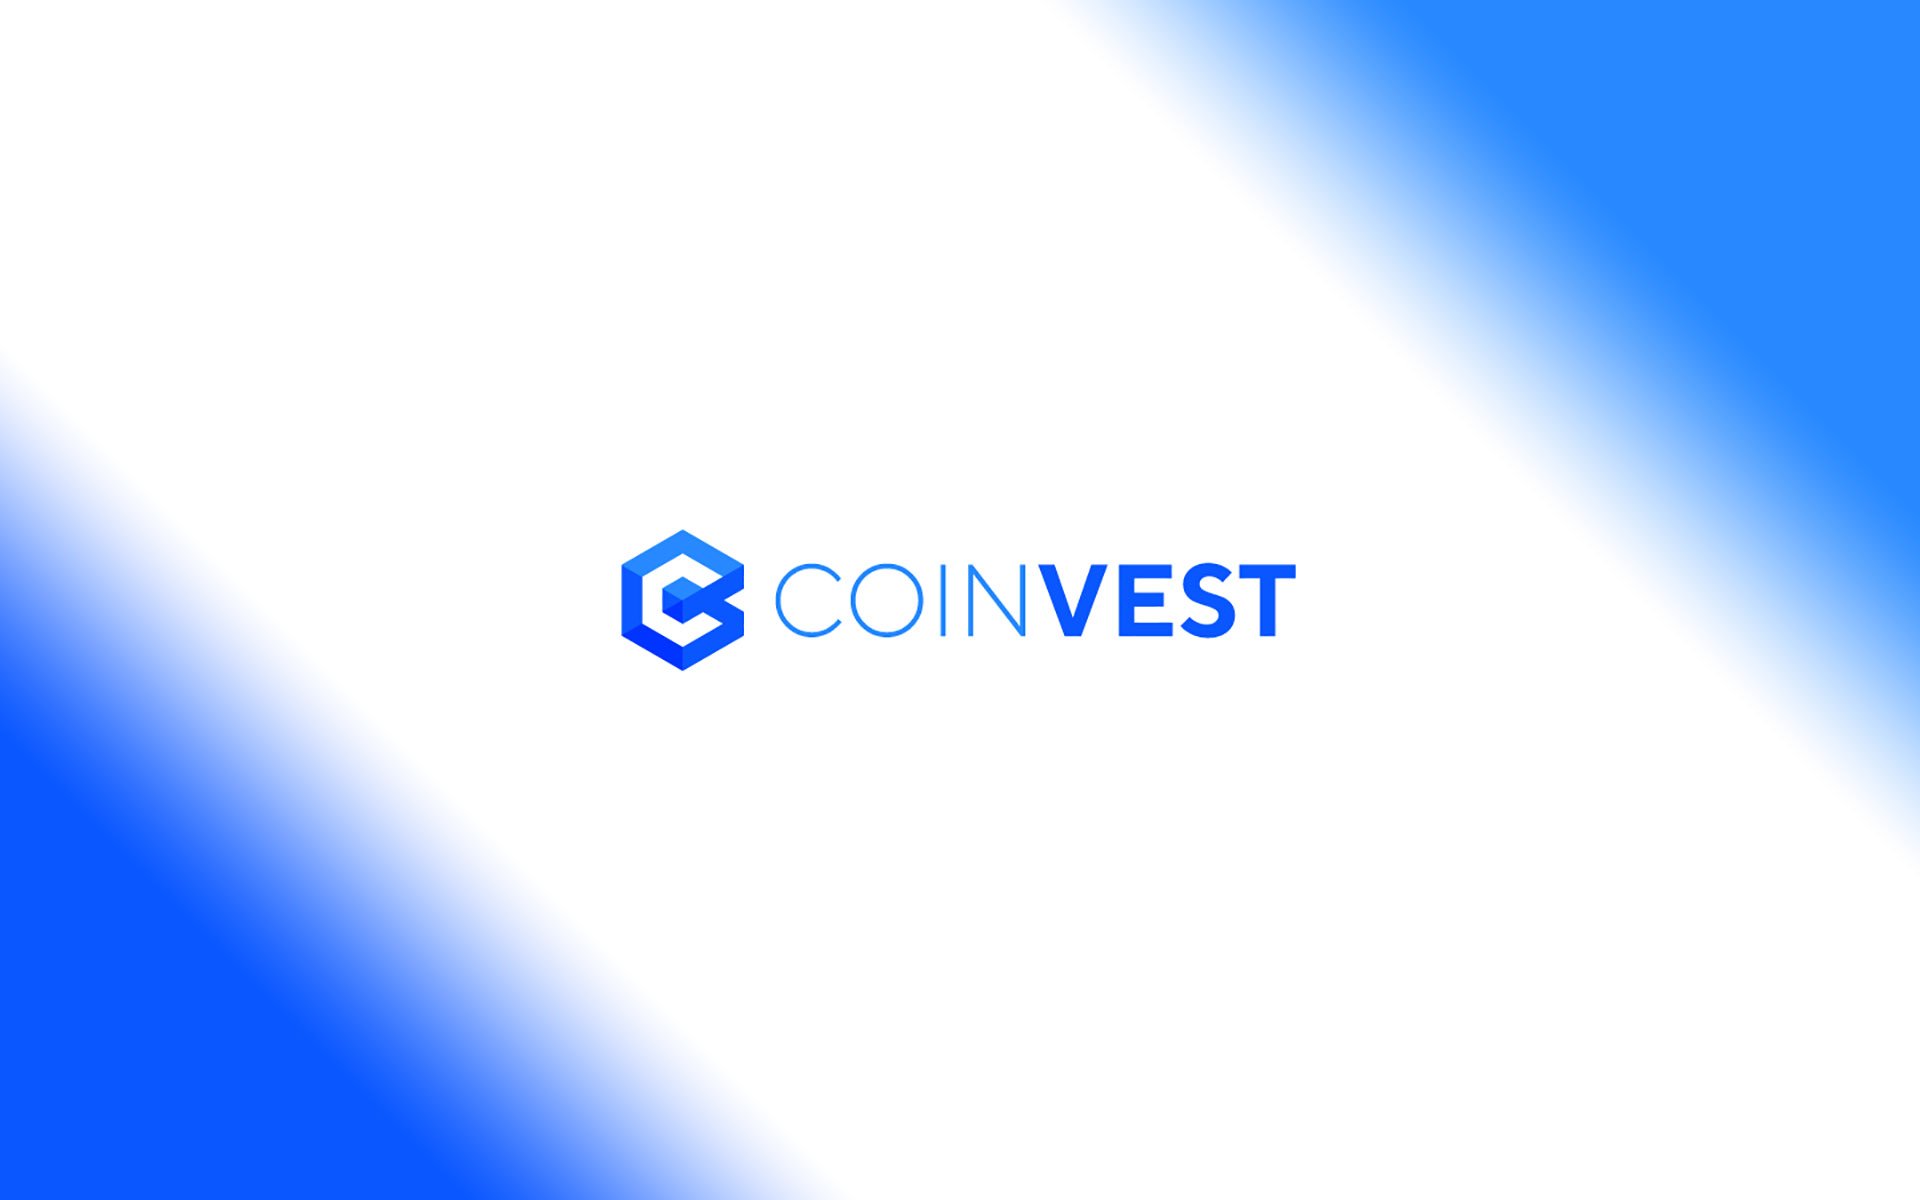 Coinvest Announces Premium Hardware Wallet with Innovative Design and Architecture to Securely Store Cryptonized Assets